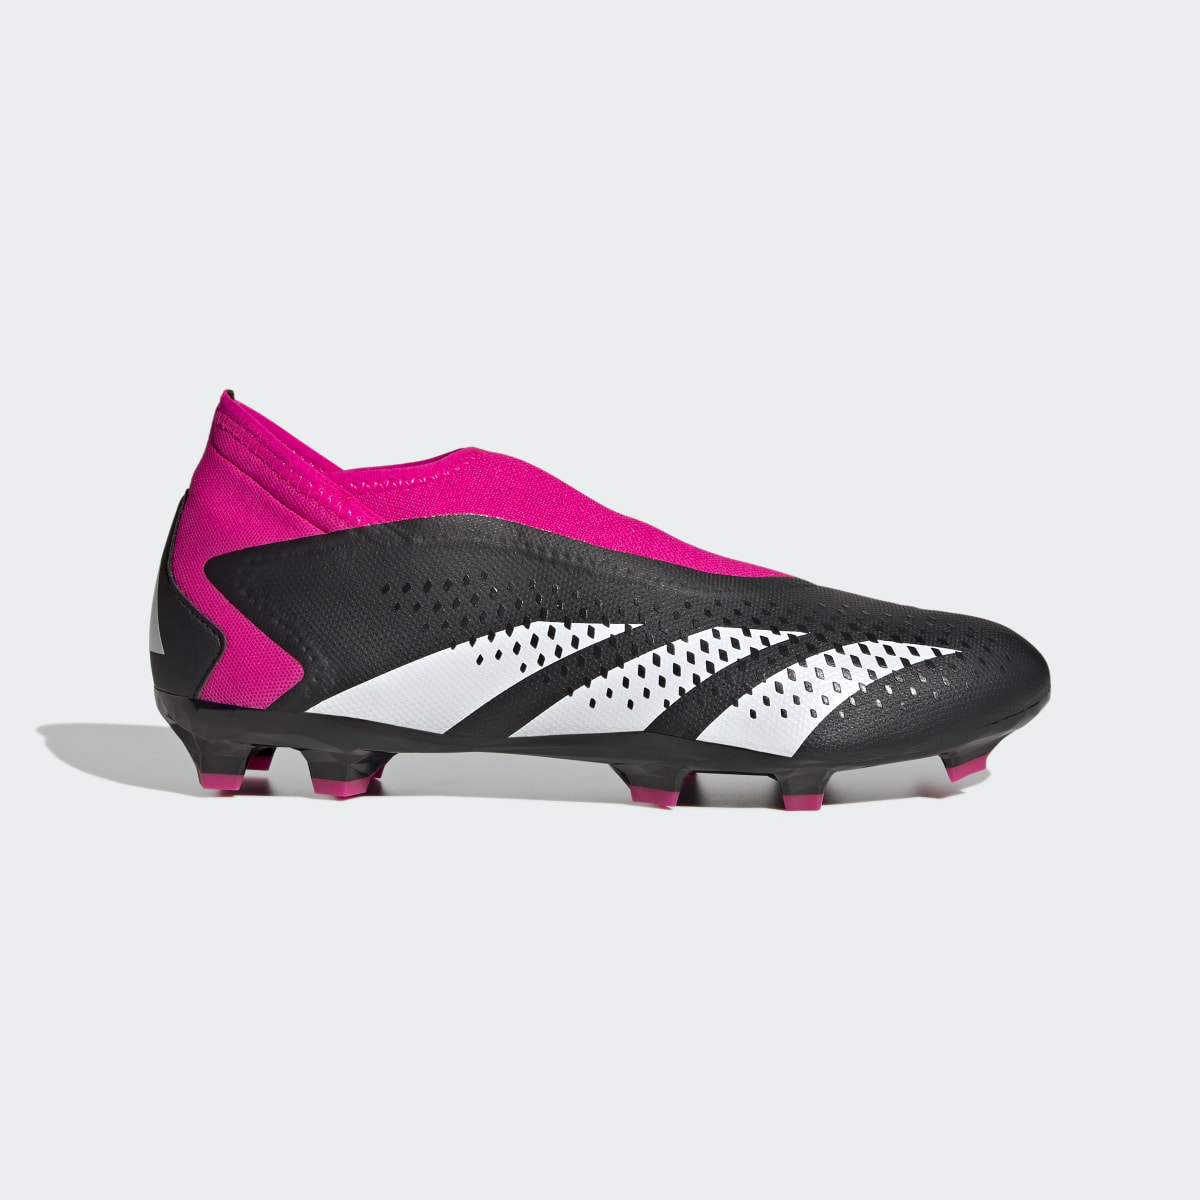 Adidas Predator Accuracy.3 Laceless Firm Ground Boots. 7